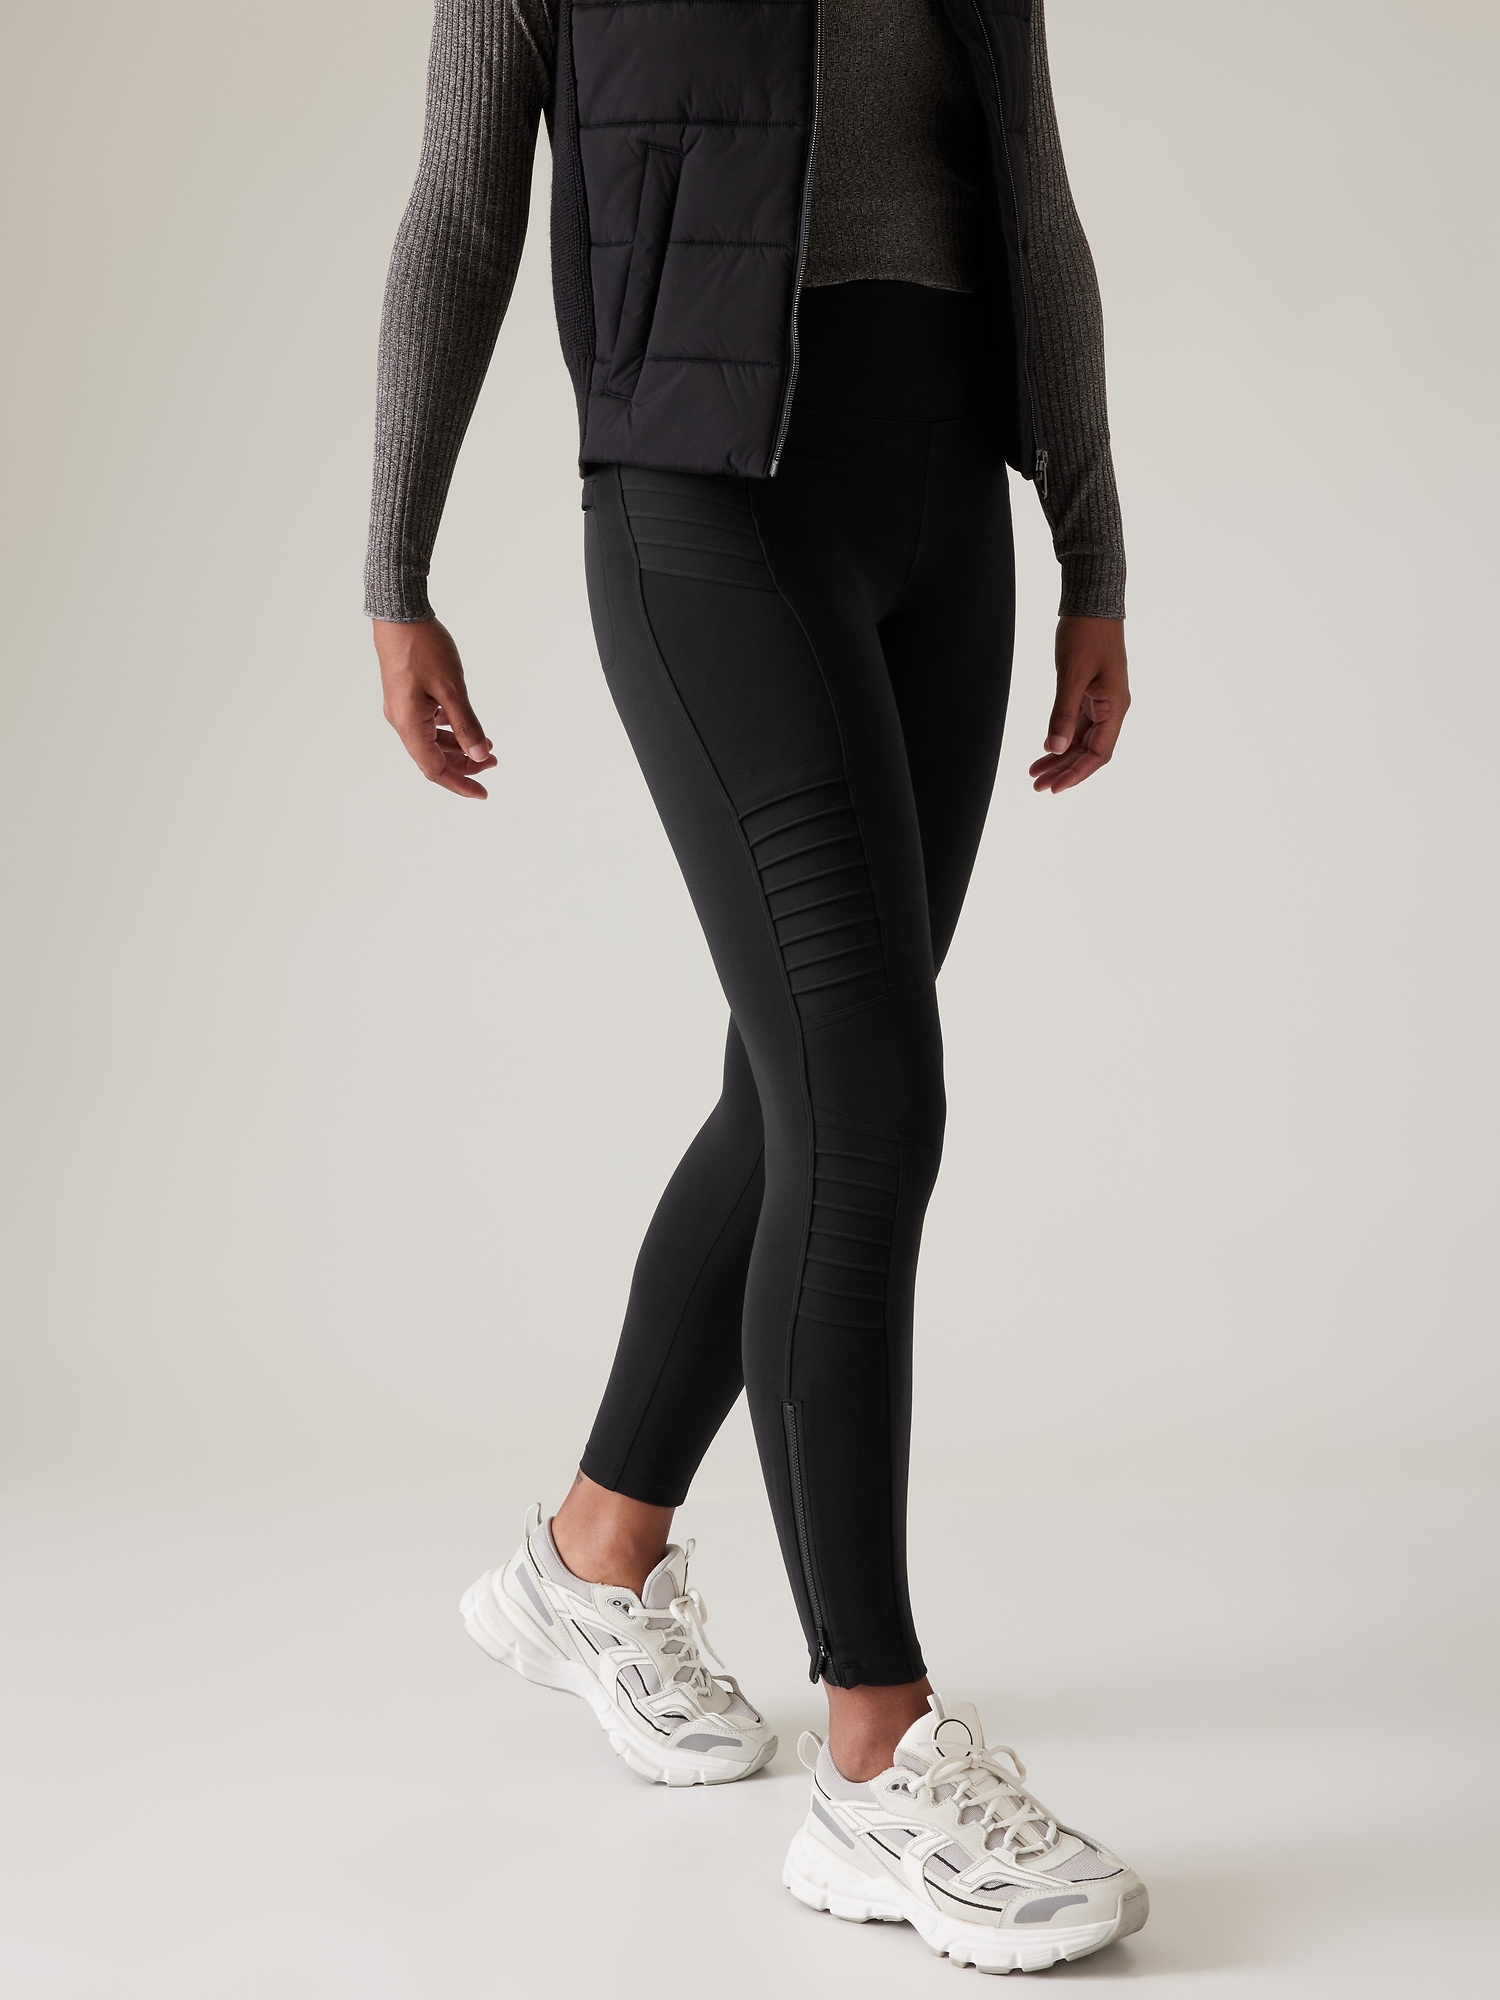 The Leggings You Need for Work